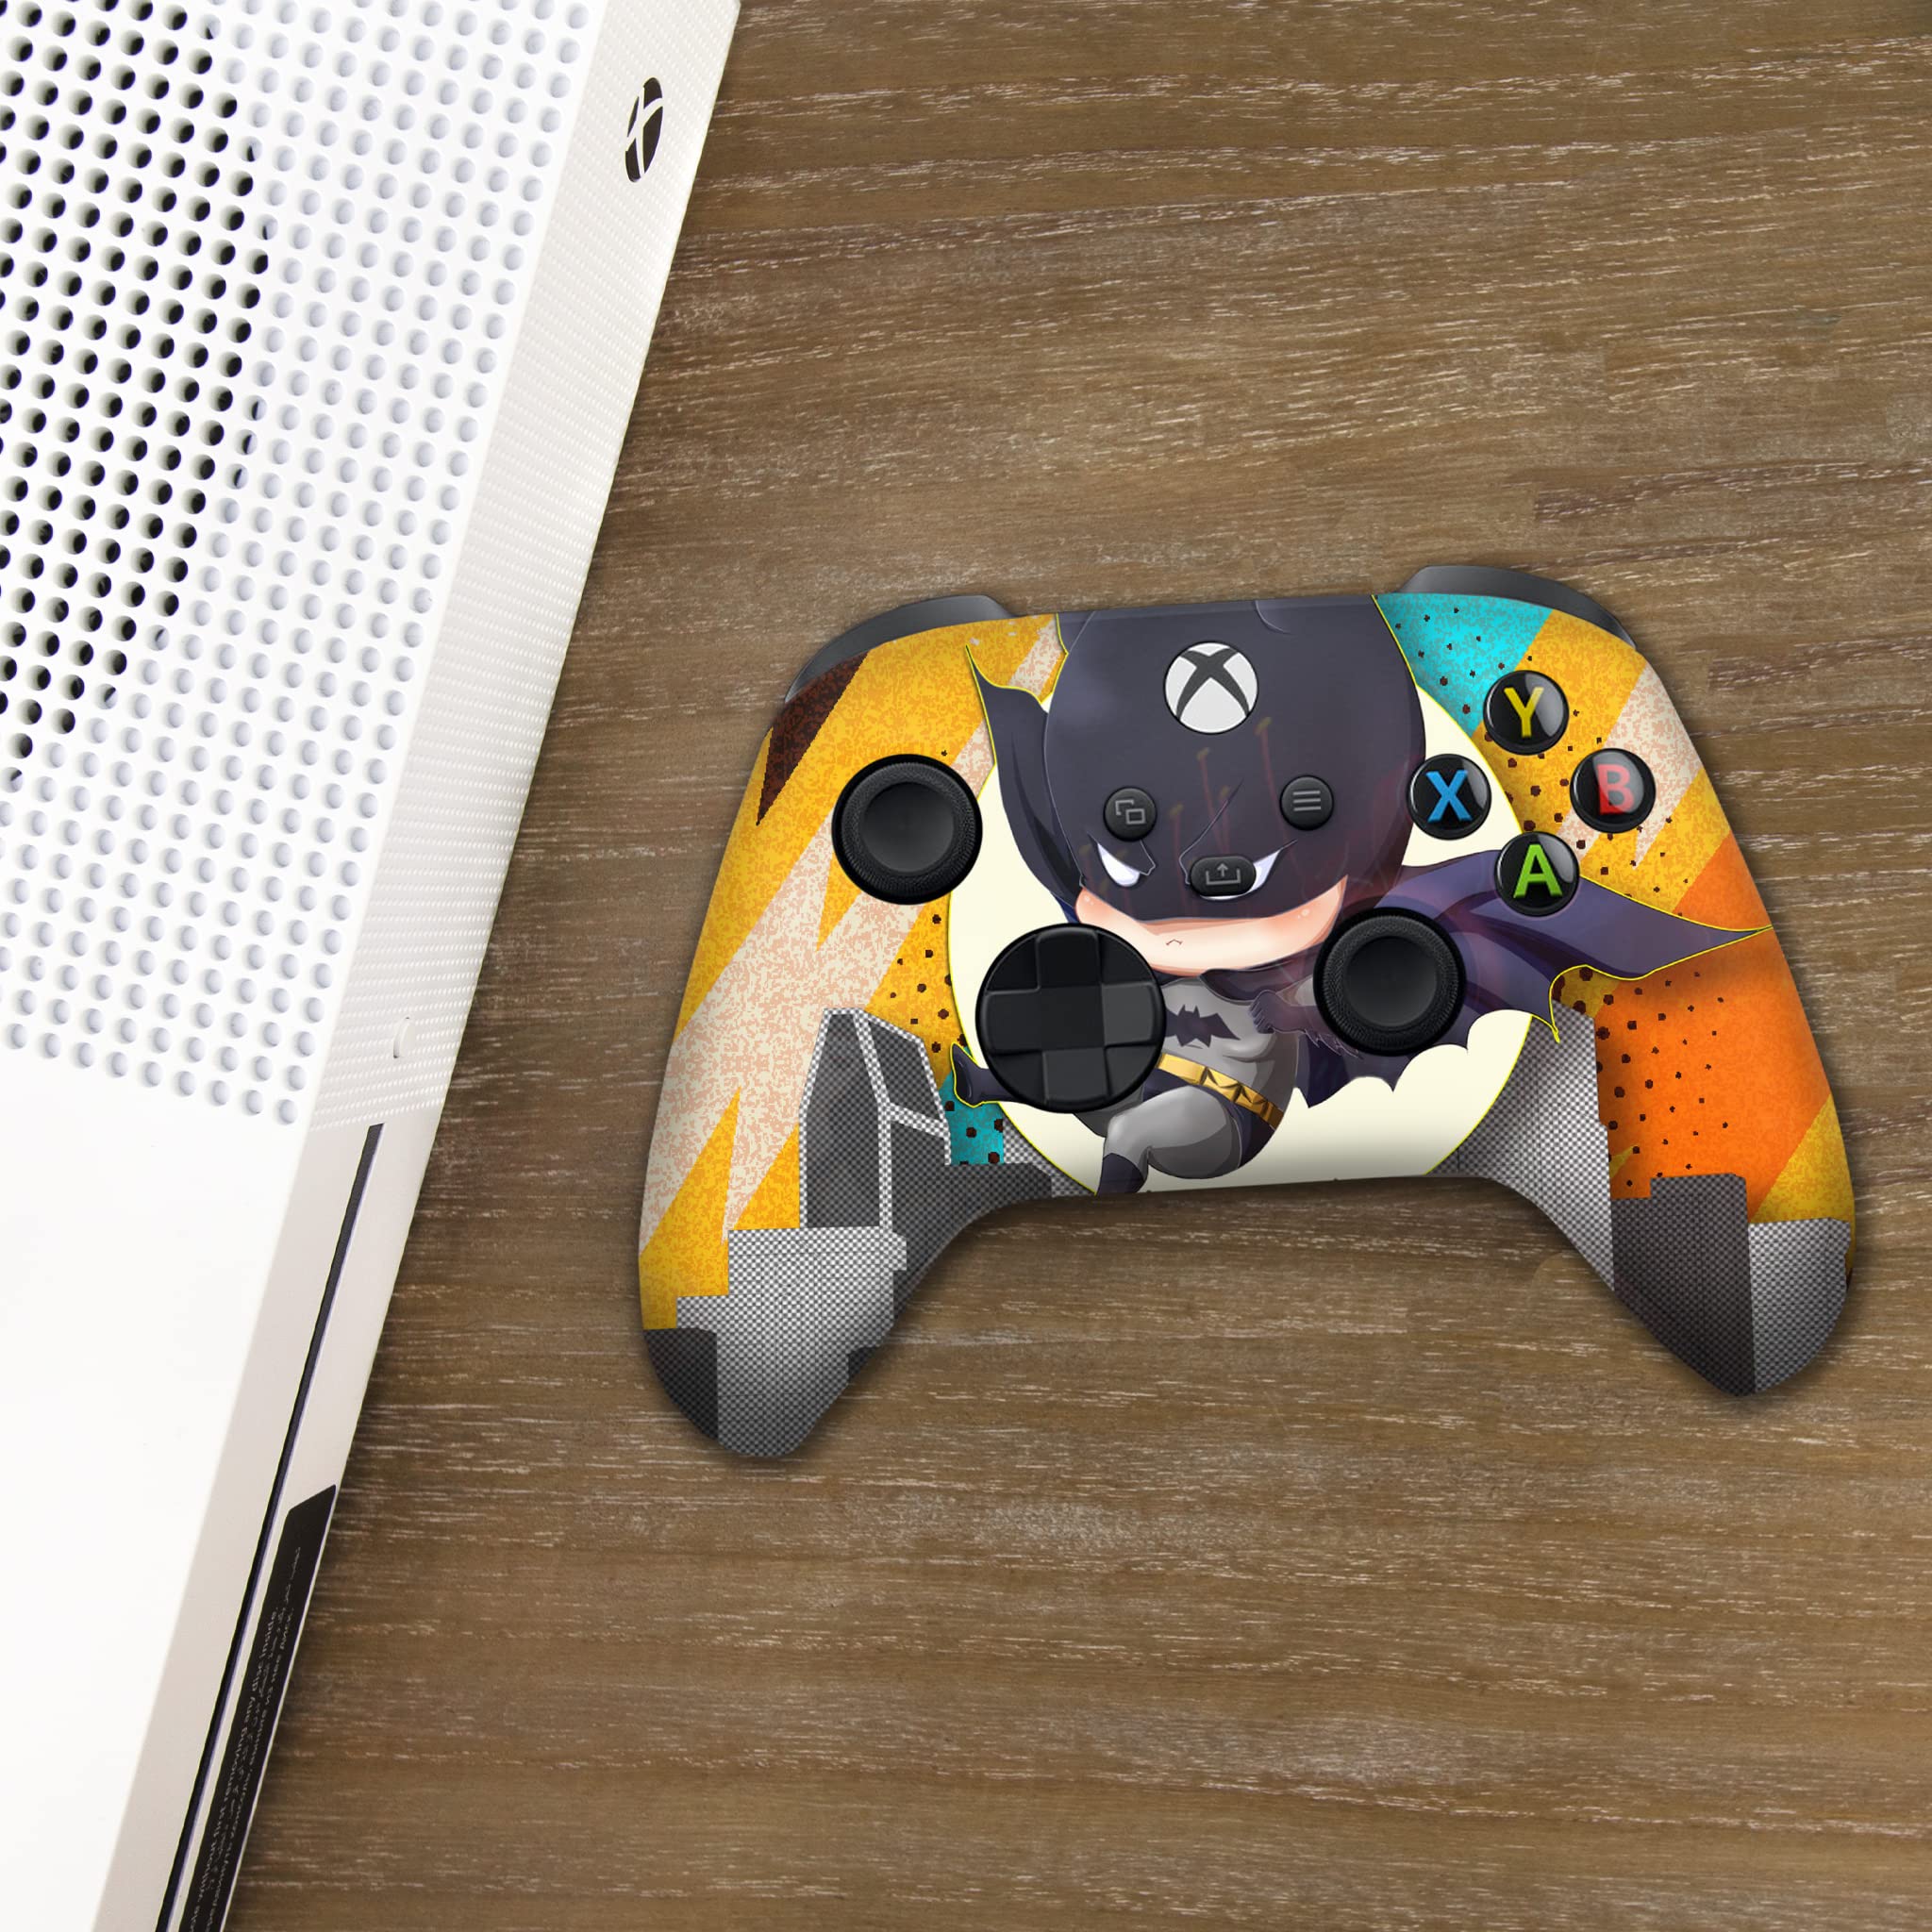 Baby batmen Vengeance Customised Wireless Controller for Xbox by BCB. Original Xbox Controller Compatible with Xbox One/Series X & S Console. Customized with Water Transfer Printing (Not a Skin)